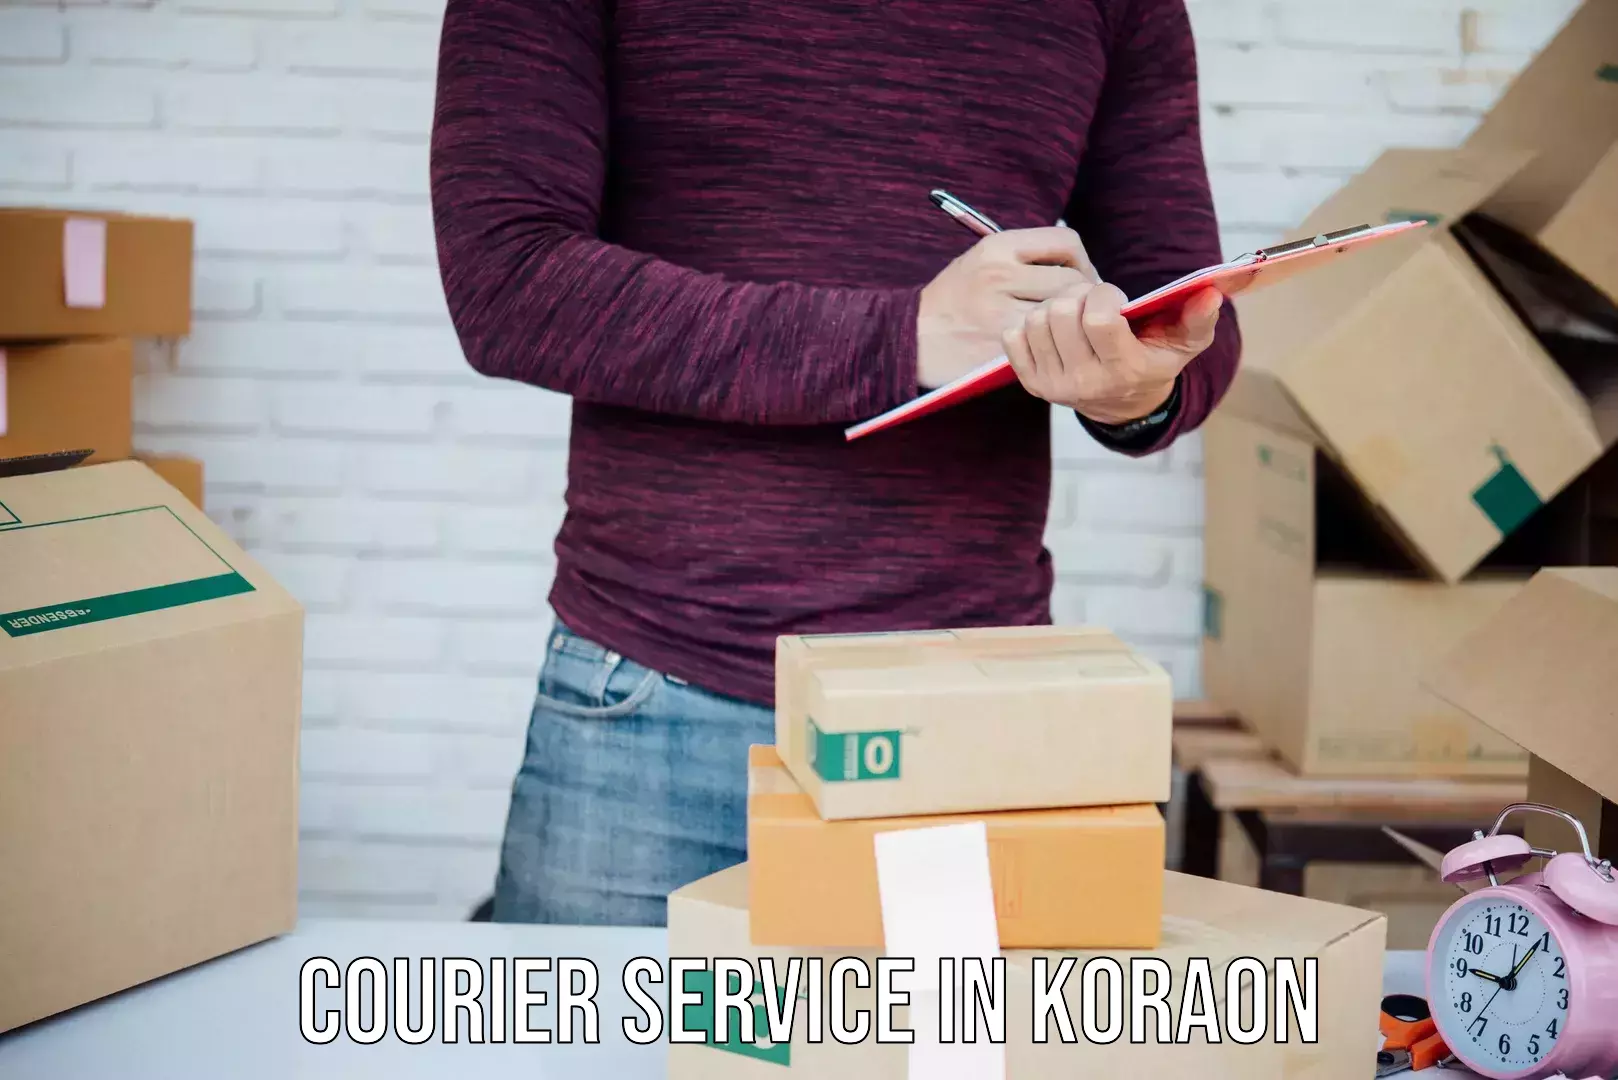 State-of-the-art courier technology in Koraon